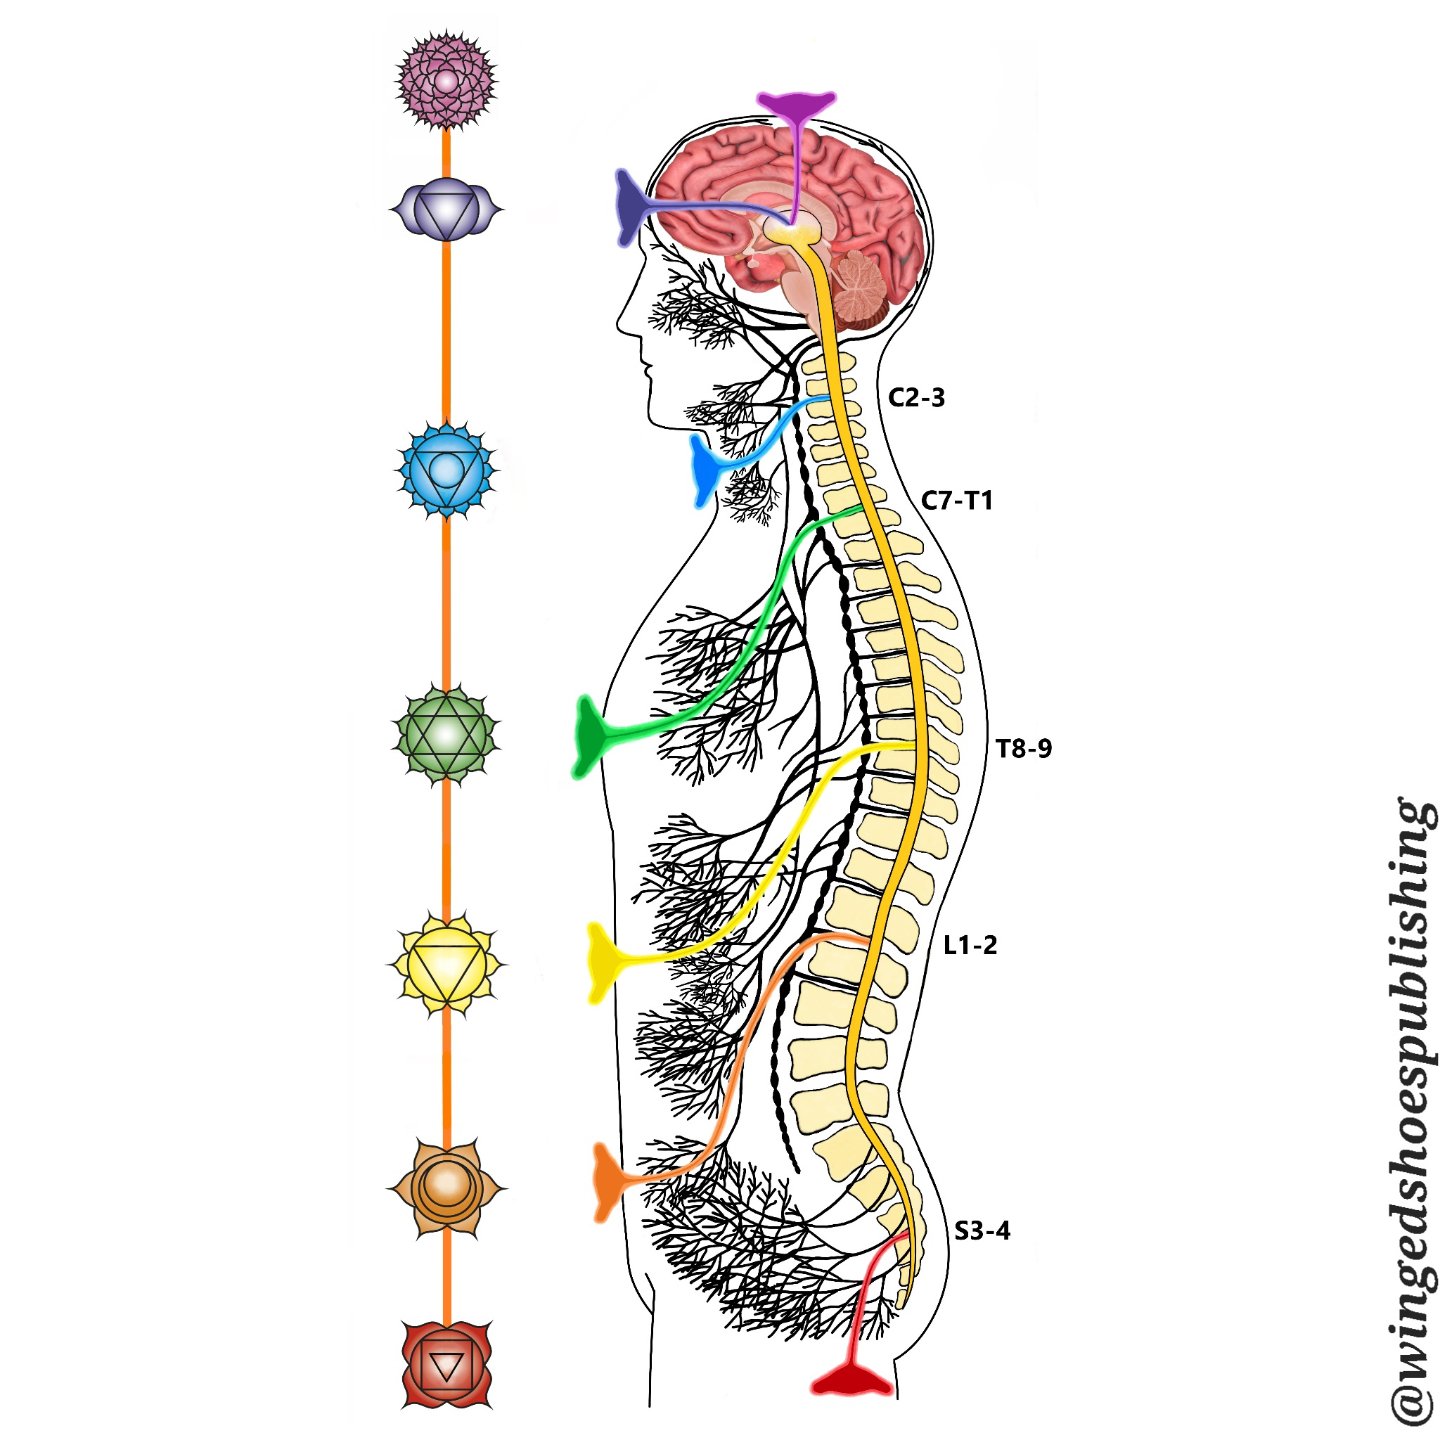 The areas where the Sympathetic Nervous System and Parasympathetic Nervous System meet are centred around major body organs and endocrine glands. Referred to as &quot;Plexuses,&quot; these convergence areas in the body's cavities form the most vital 